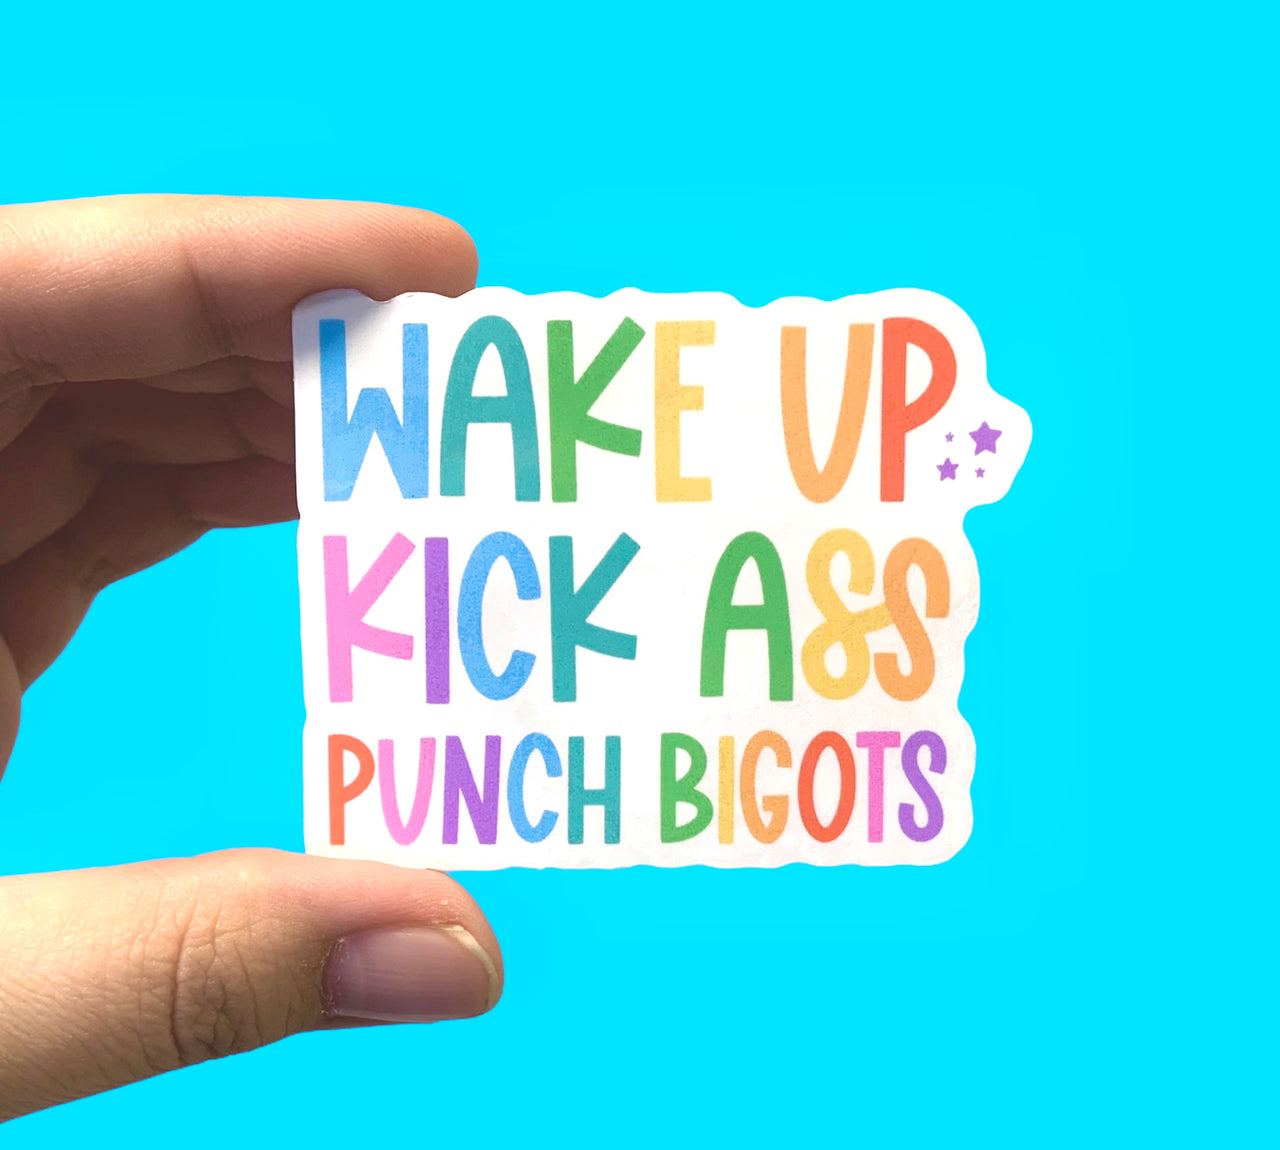 Wake up kick ass punch bigots (pack of 3 or 5 stickers)